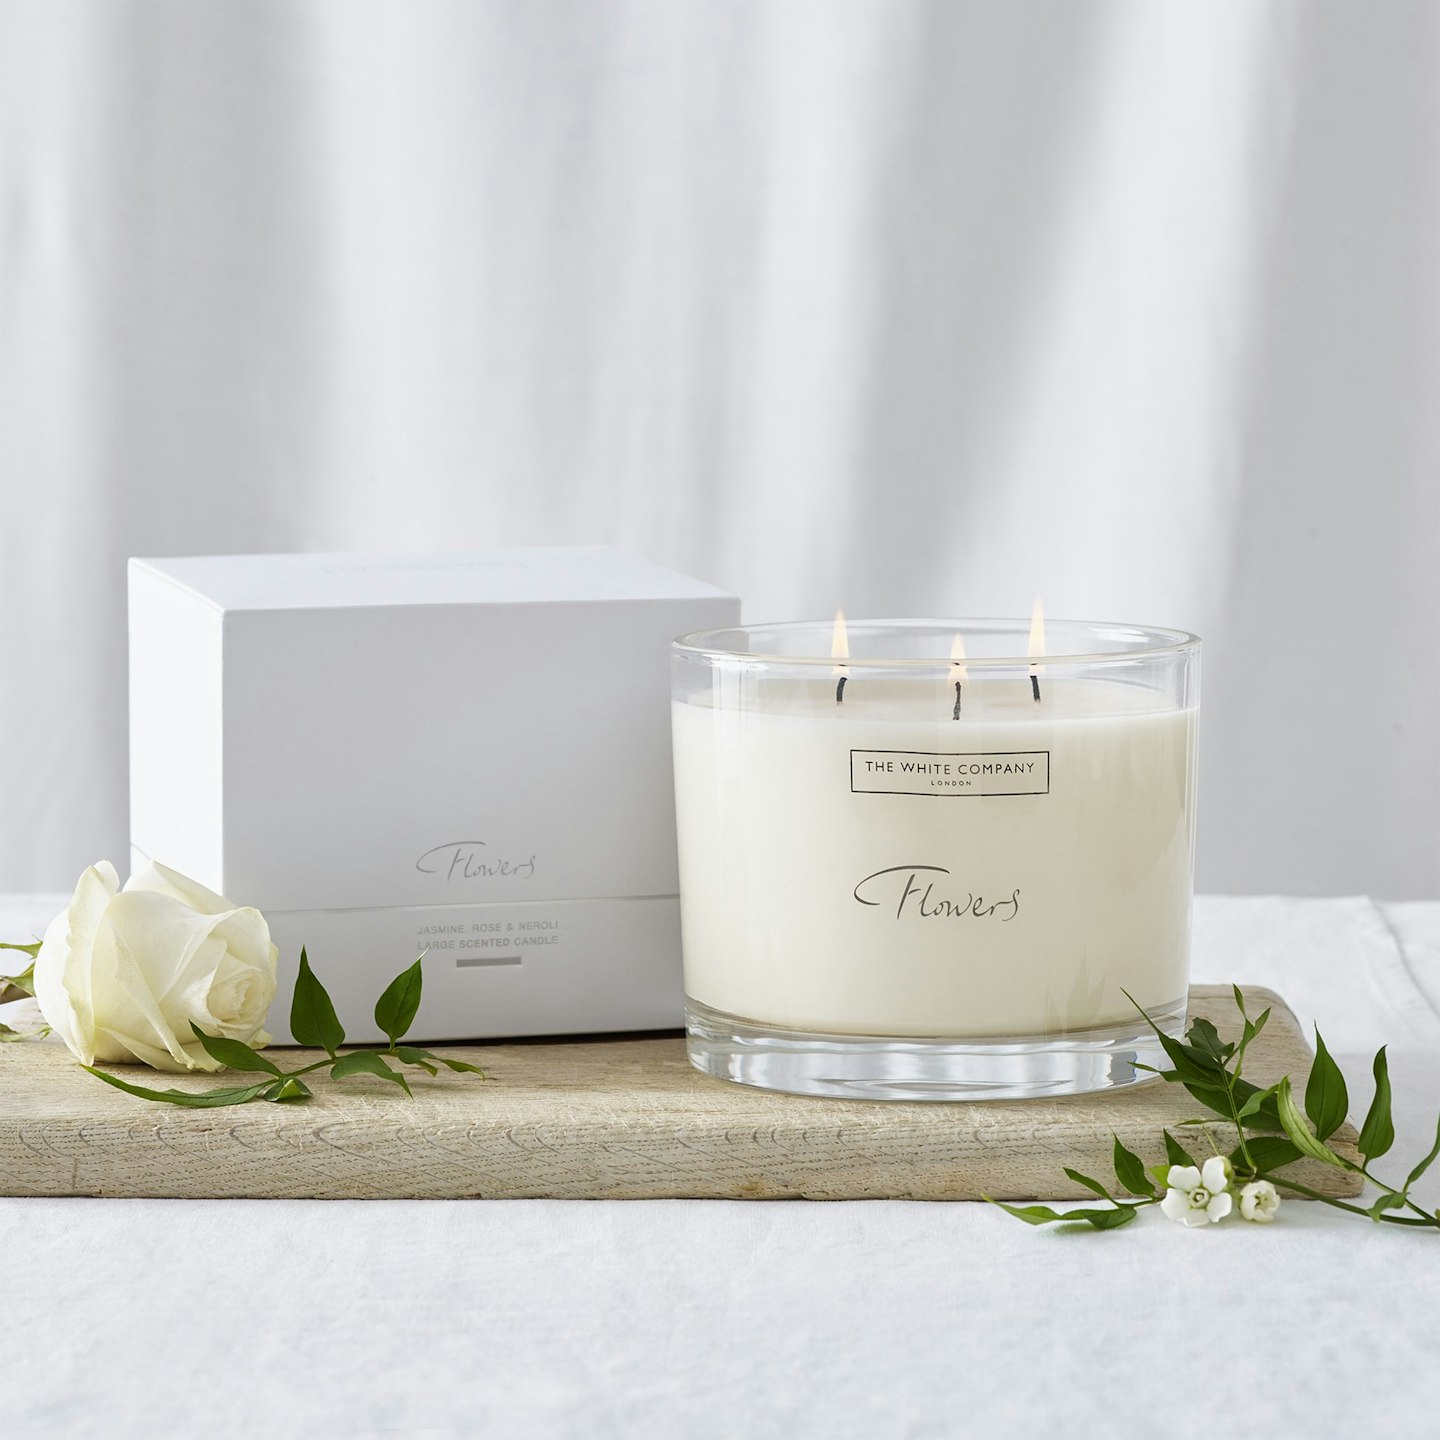 The White Company, Flowers Large Candle, £60